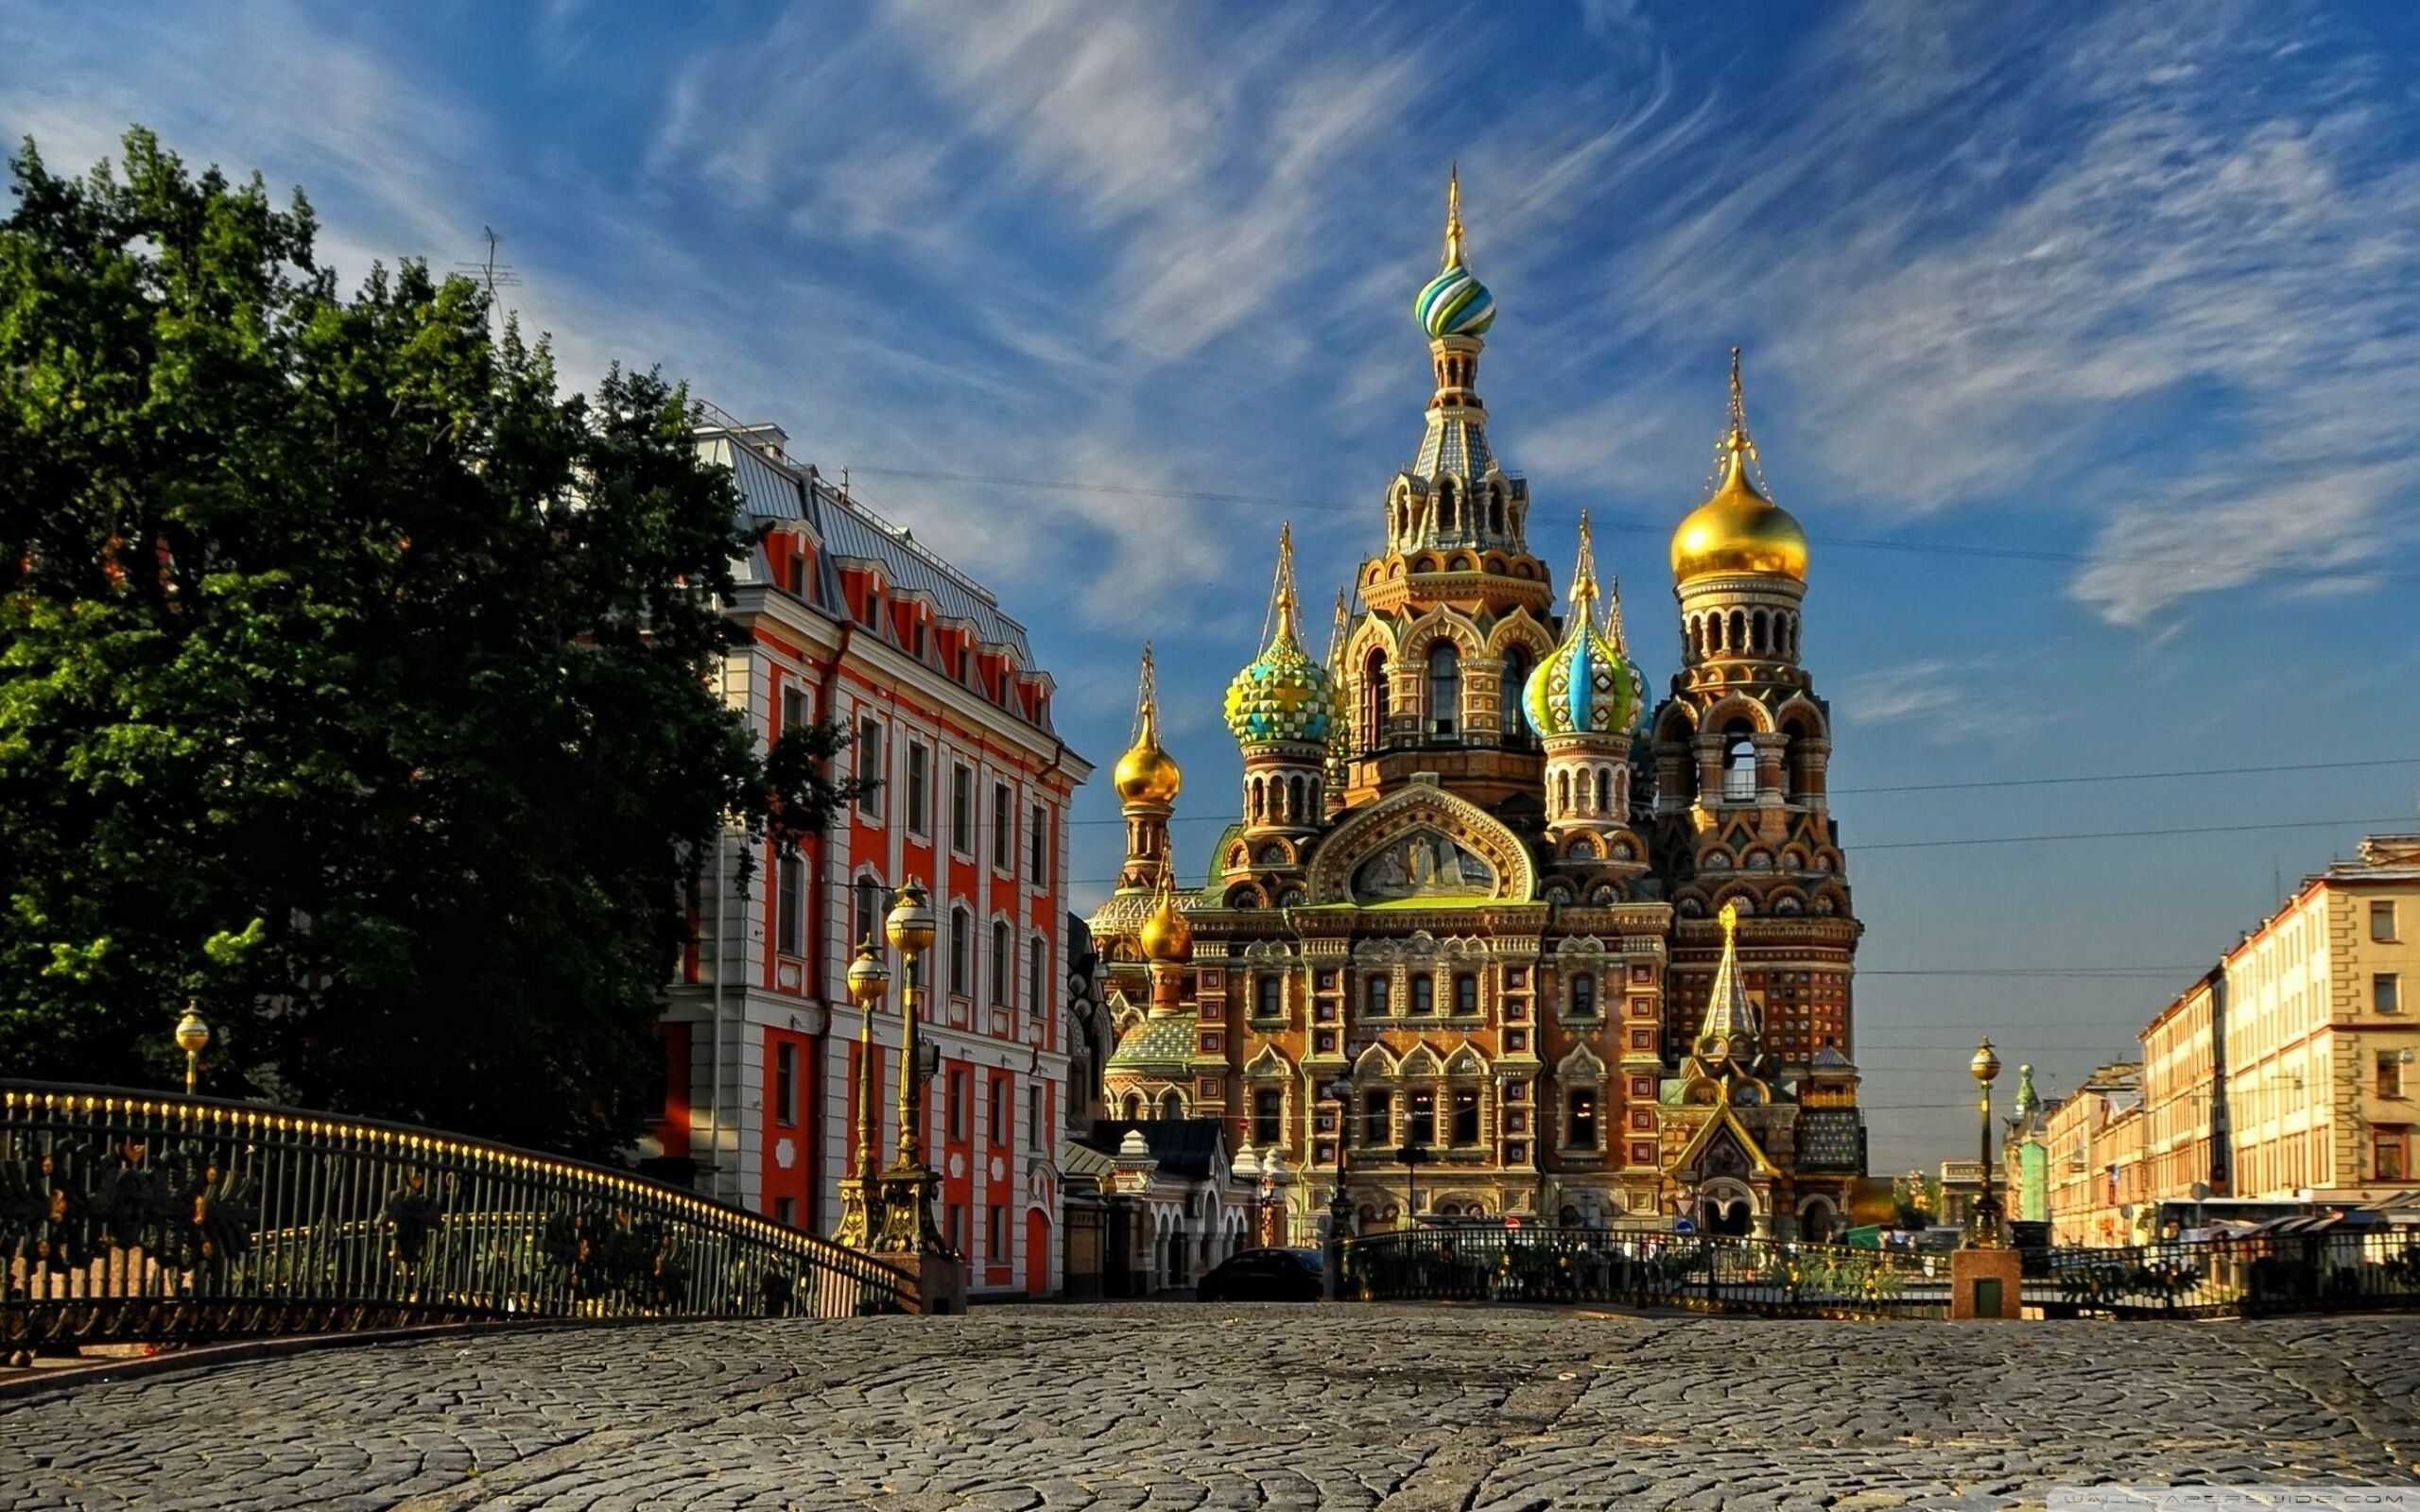 Russian Wallpaper: HD, 4K, 5K for PC and Mobile. Download free image for iPhone, Android